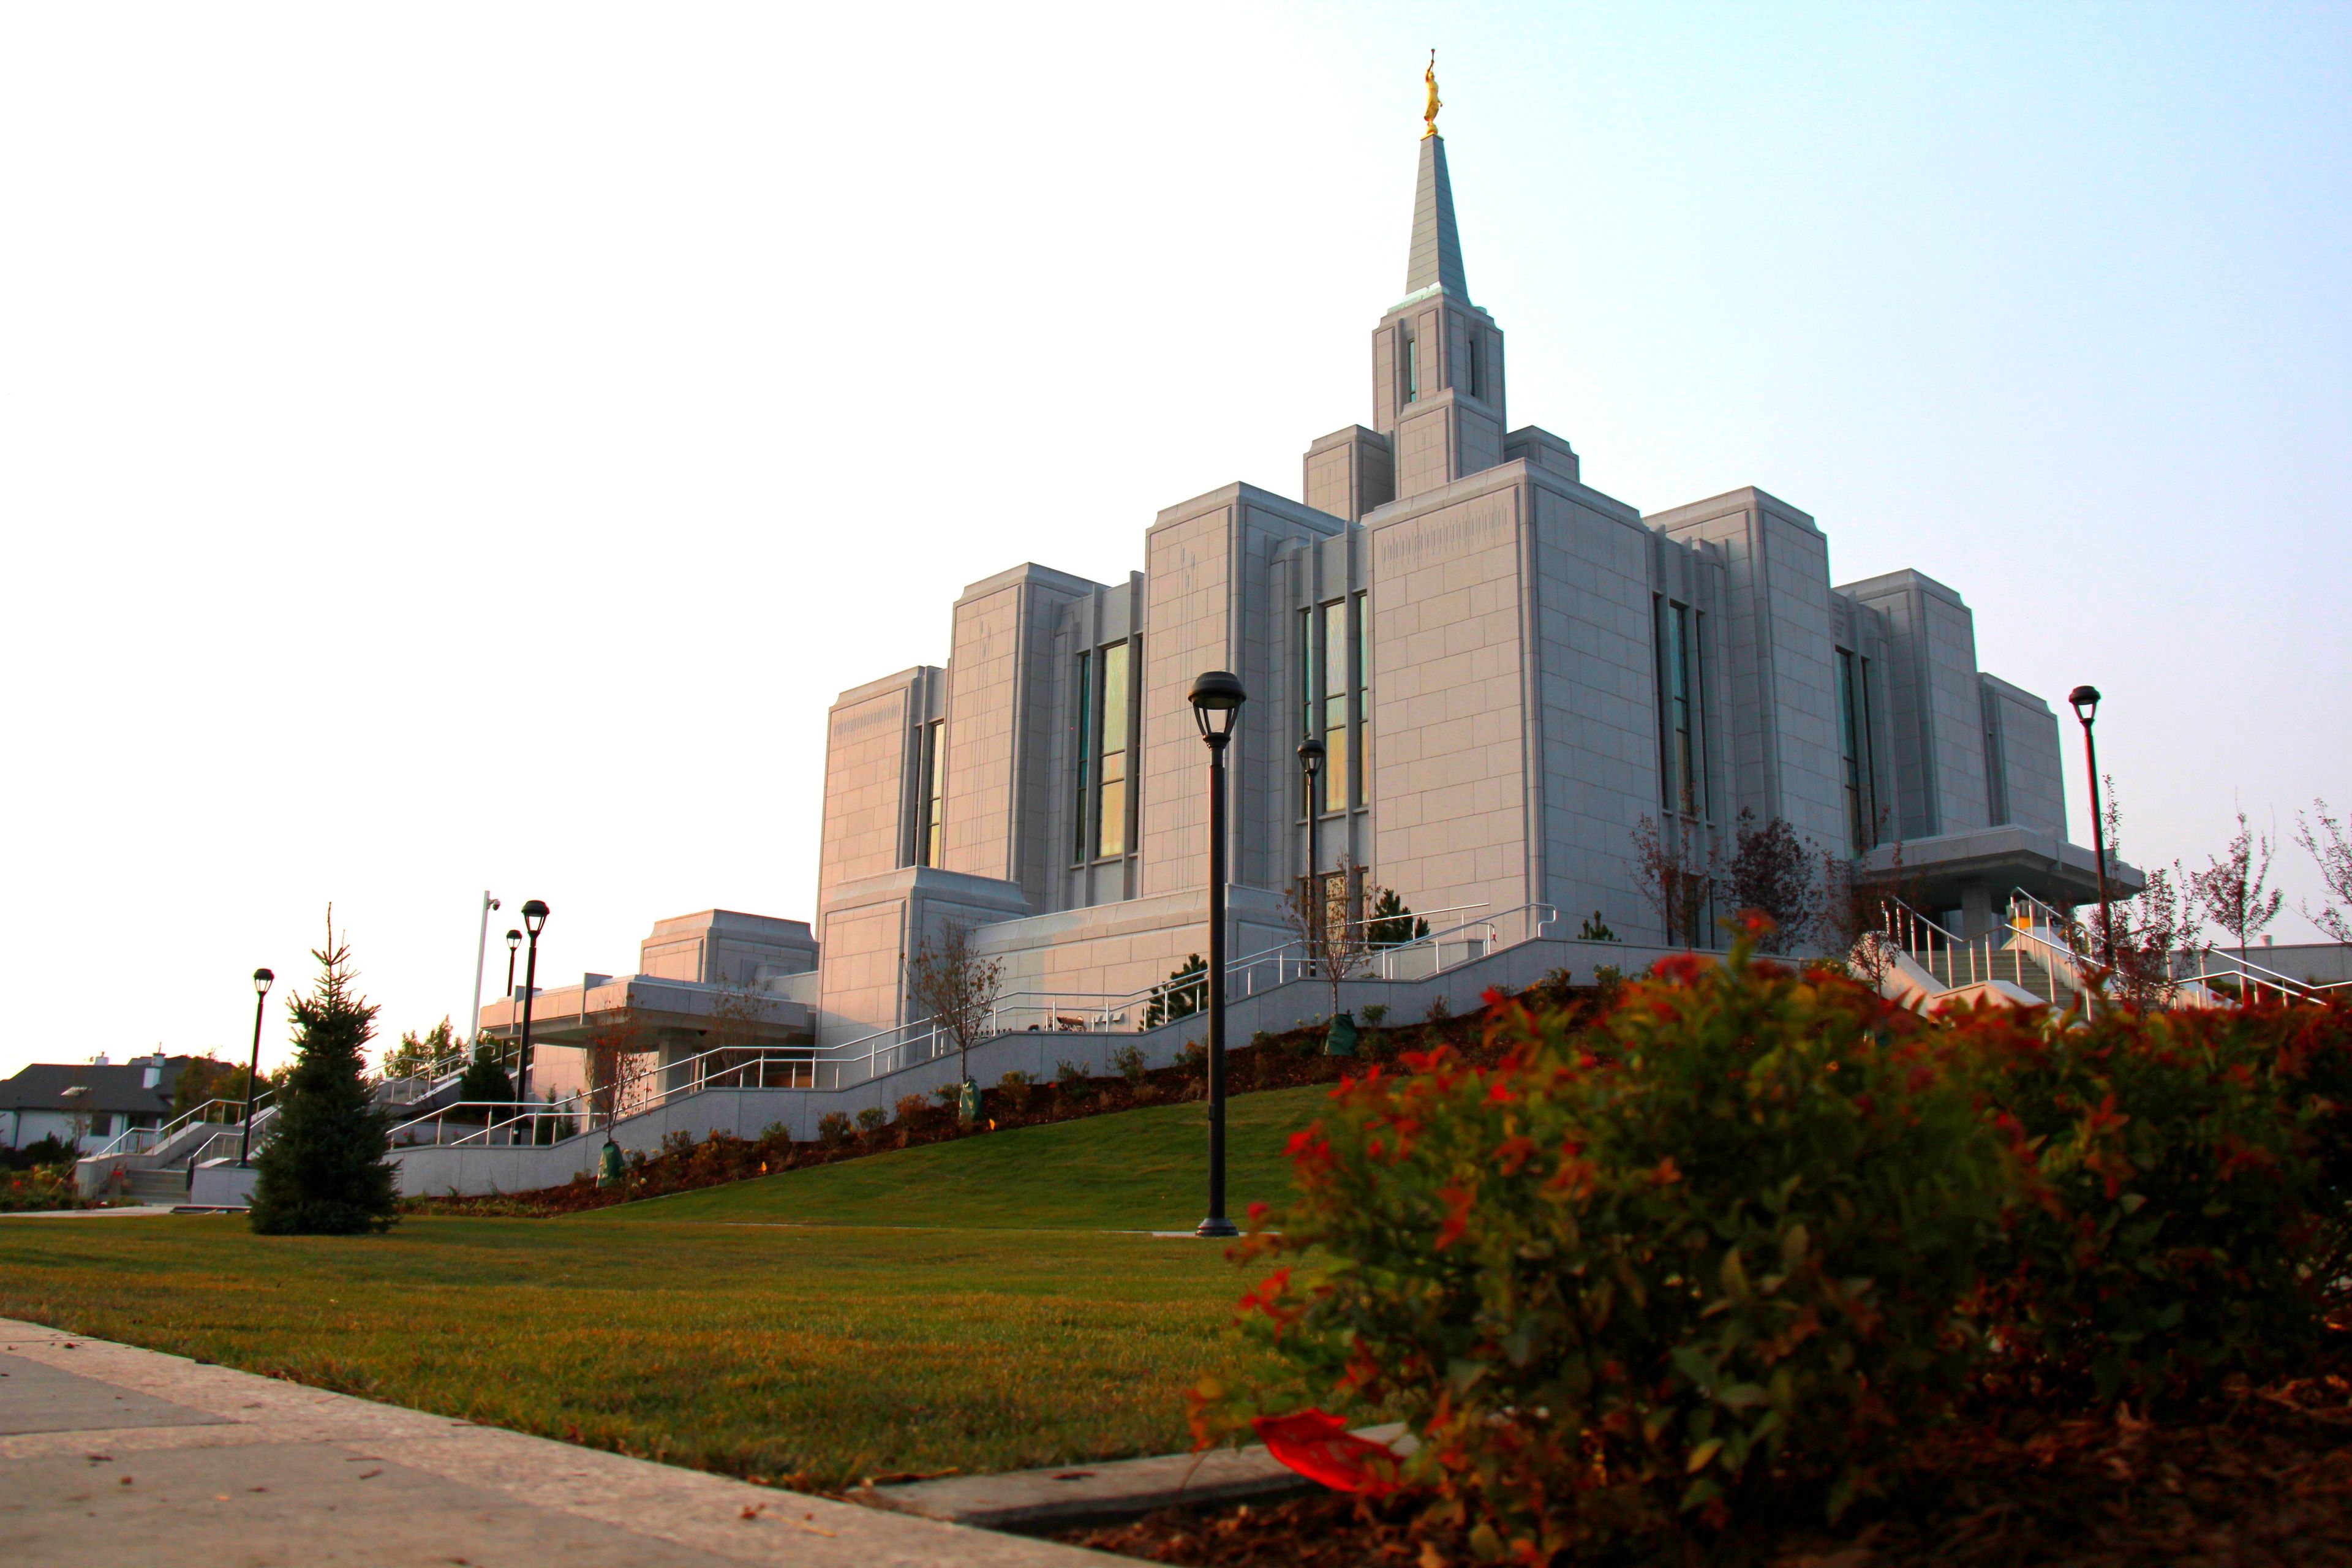 A view of the Calgary Alberta Temple in the evening from the temple grounds.